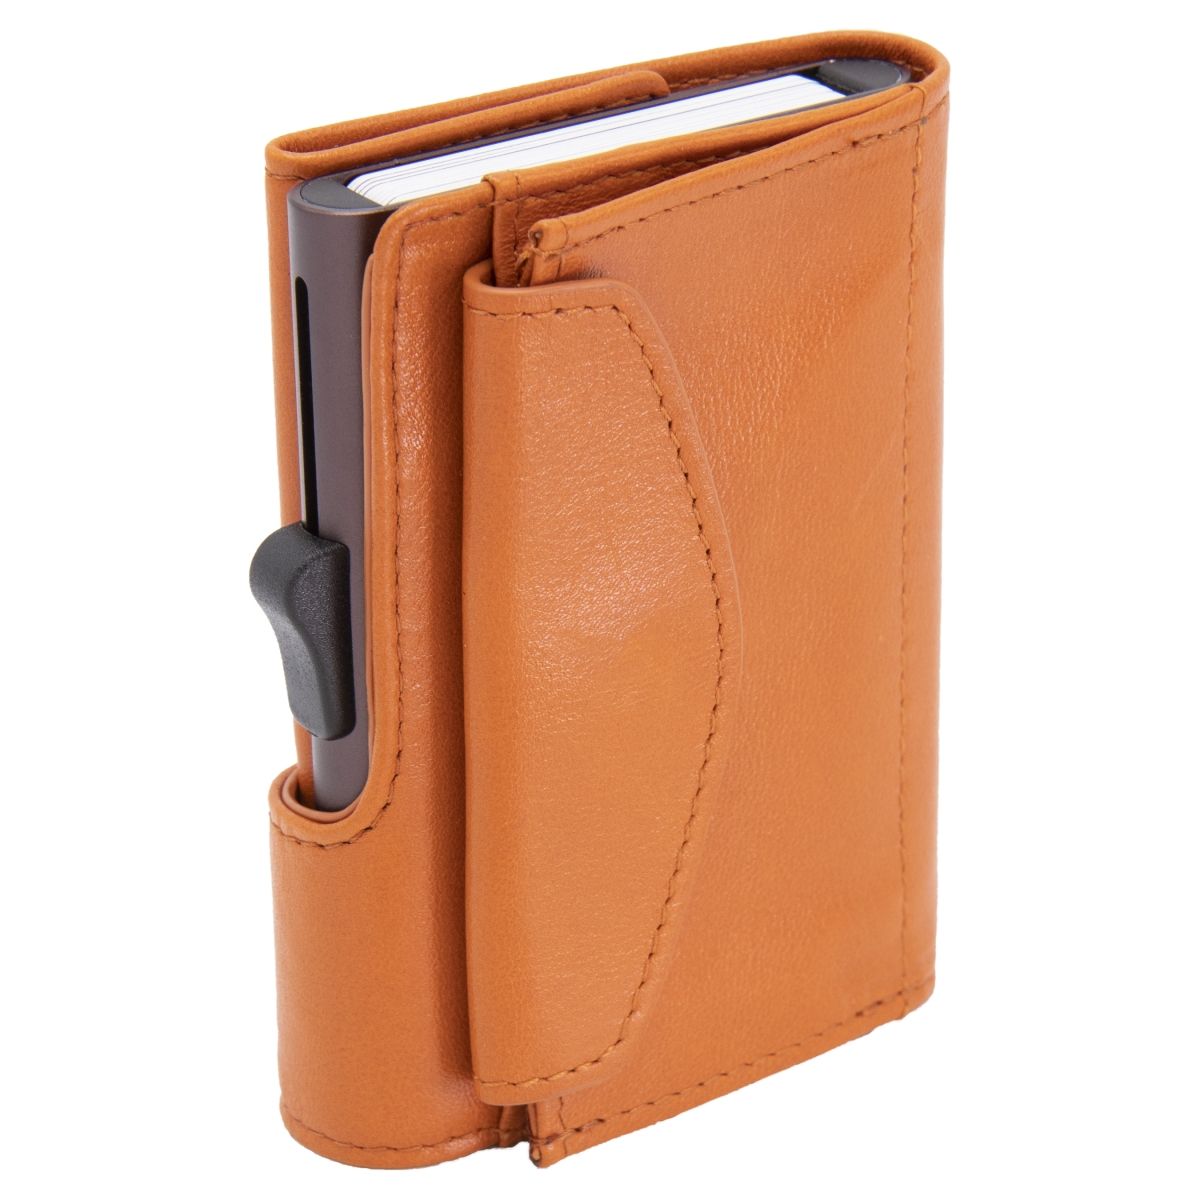 C-Secure XL Aluminum Wallet with Genuine Leather and Coins Pocket - Arancio